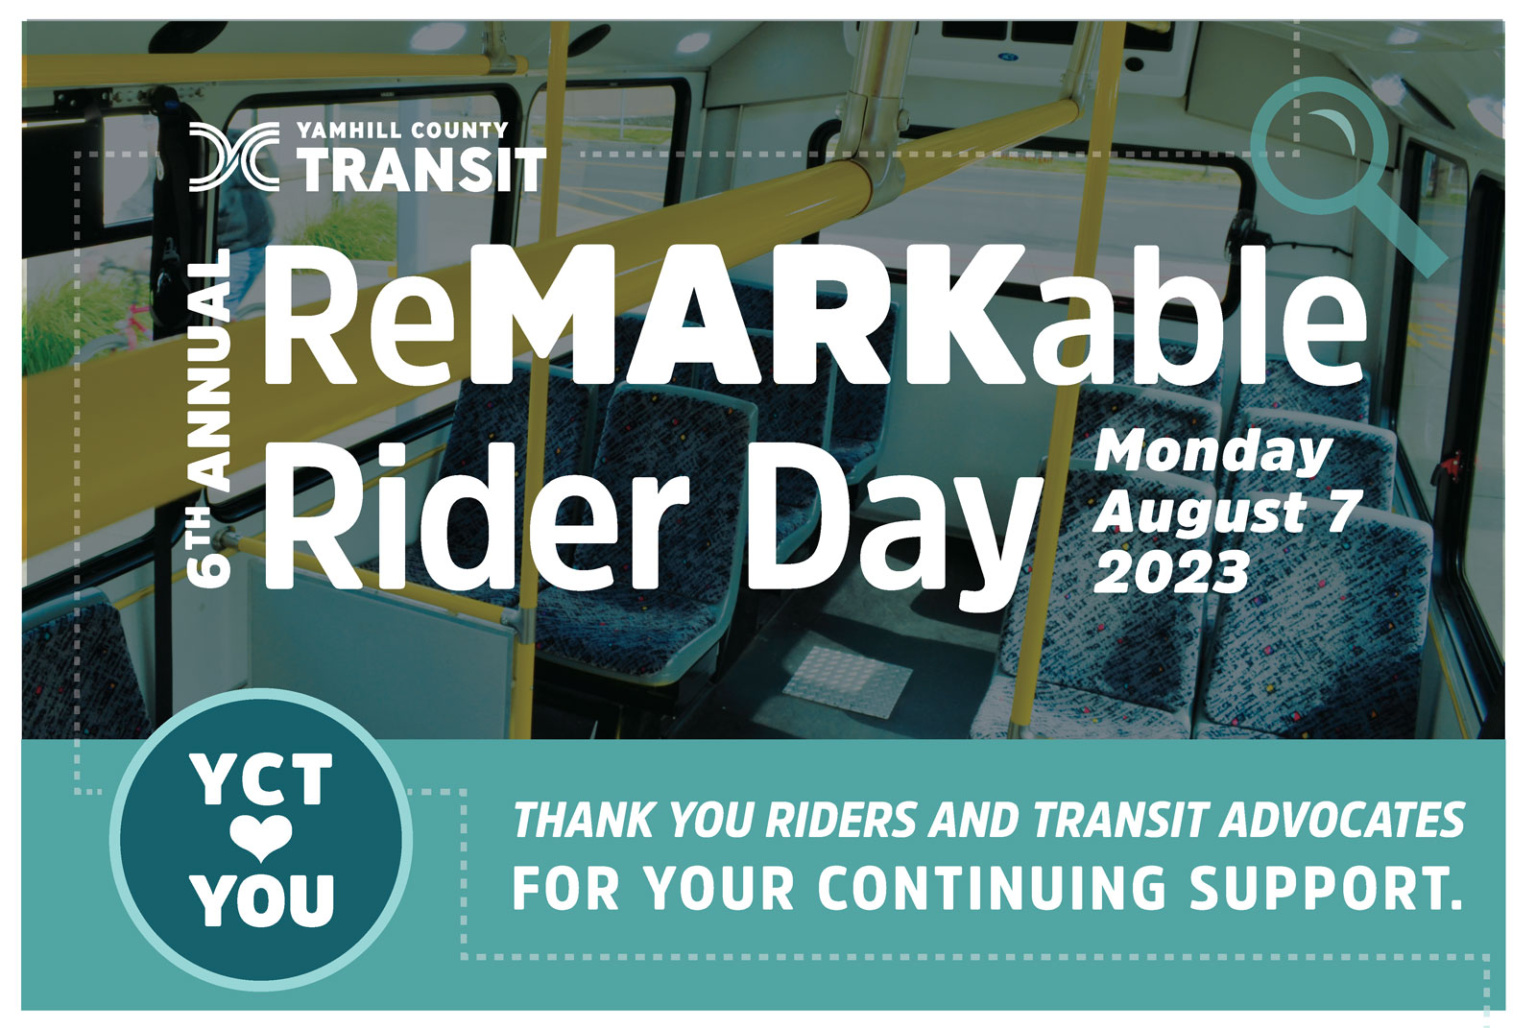 ReMARKable Rider Day - August 7, 2023 | McMinnville Transit Center